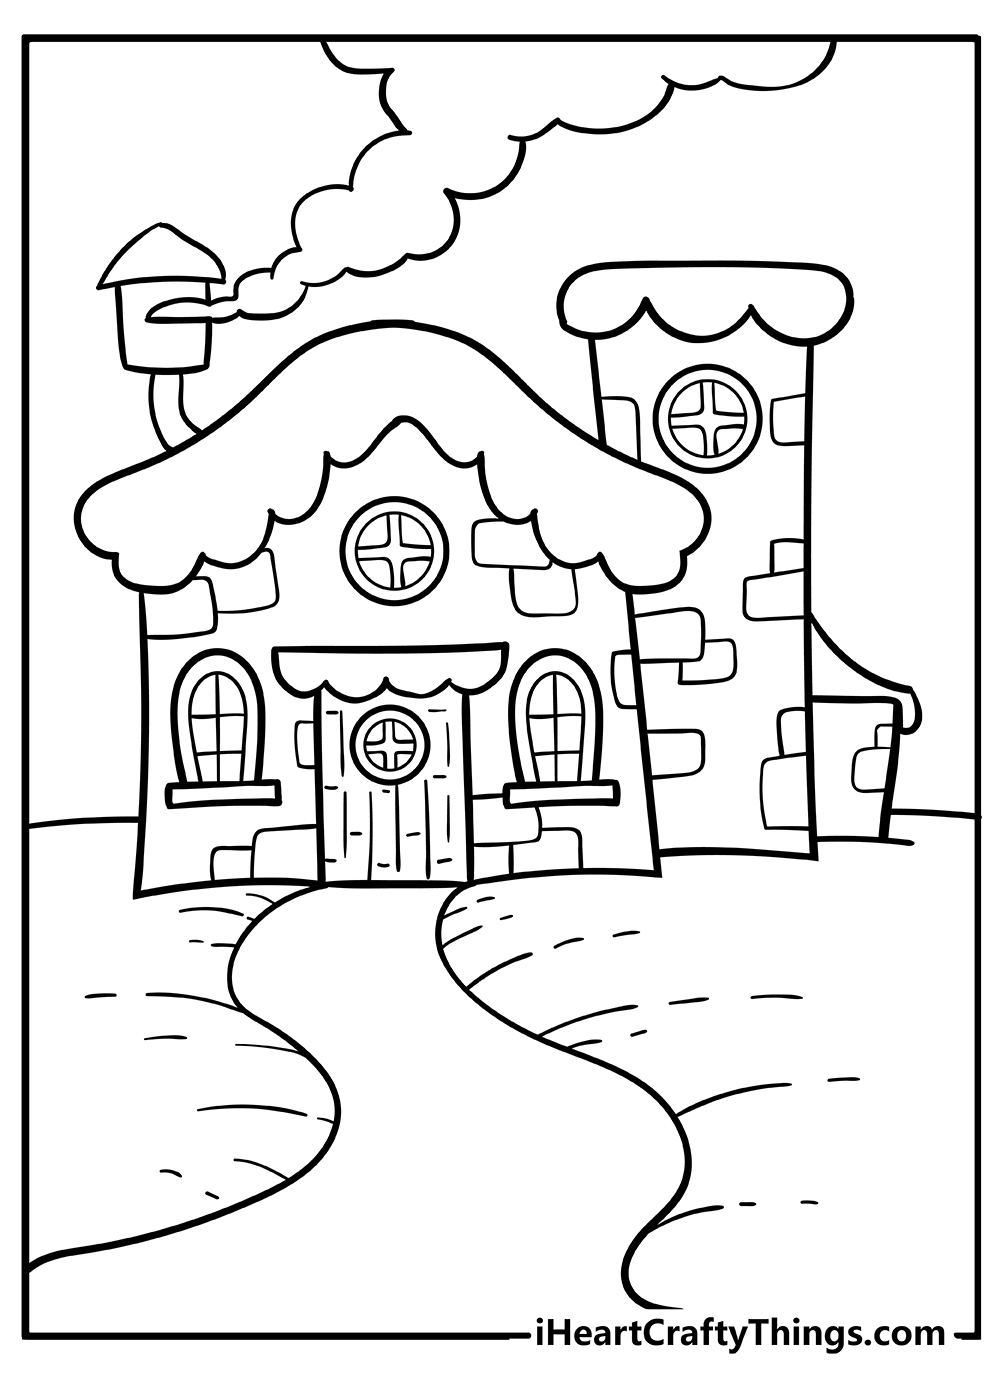 House Coloring Pages free pdf download